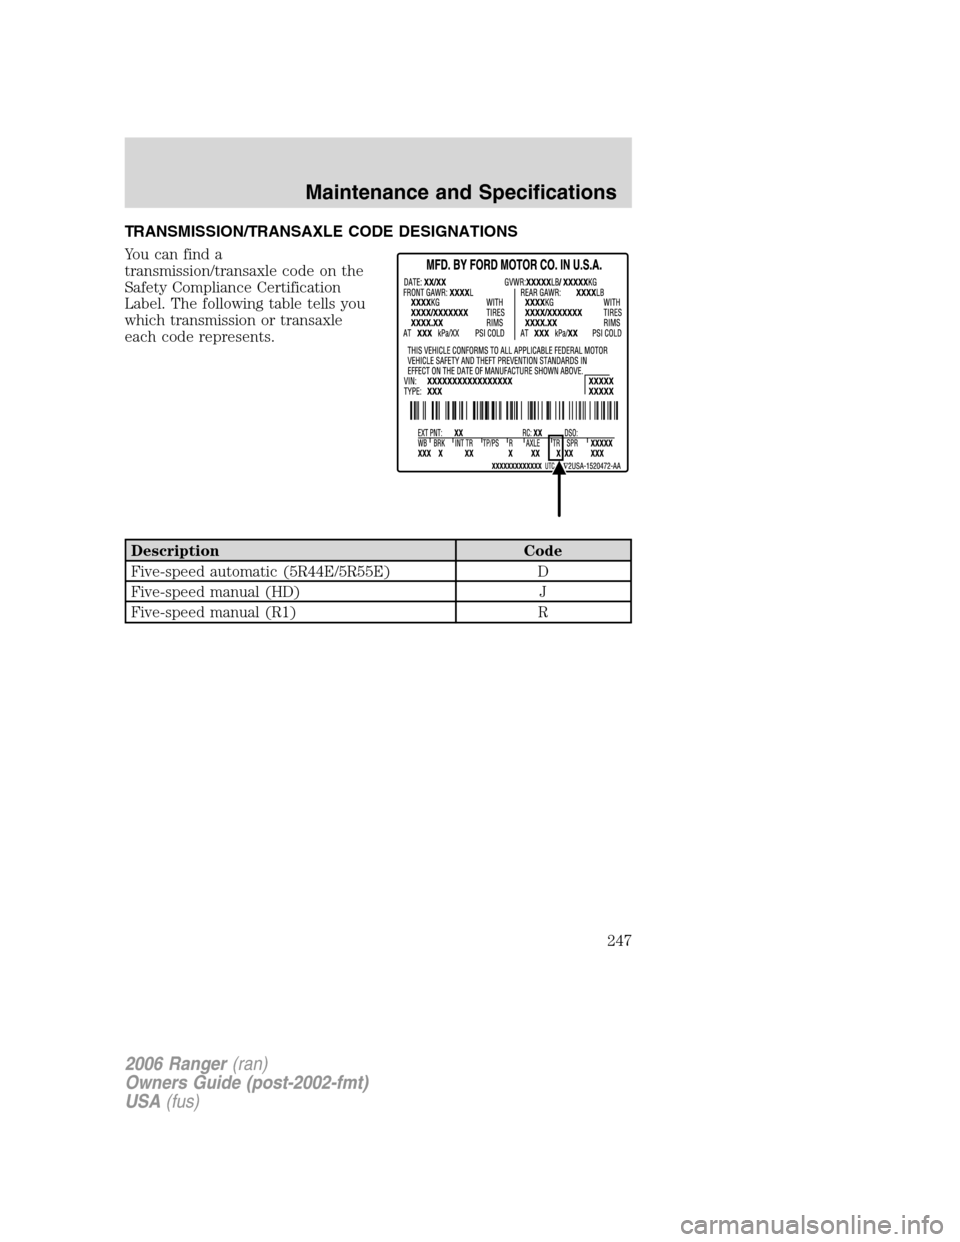 FORD RANGER 2006 2.G Repair Manual TRANSMISSION/TRANSAXLE CODE DESIGNATIONS
You can find a
transmission/transaxle code on the
Safety Compliance Certification
Label. The following table tells you
which transmission or transaxle
each cod